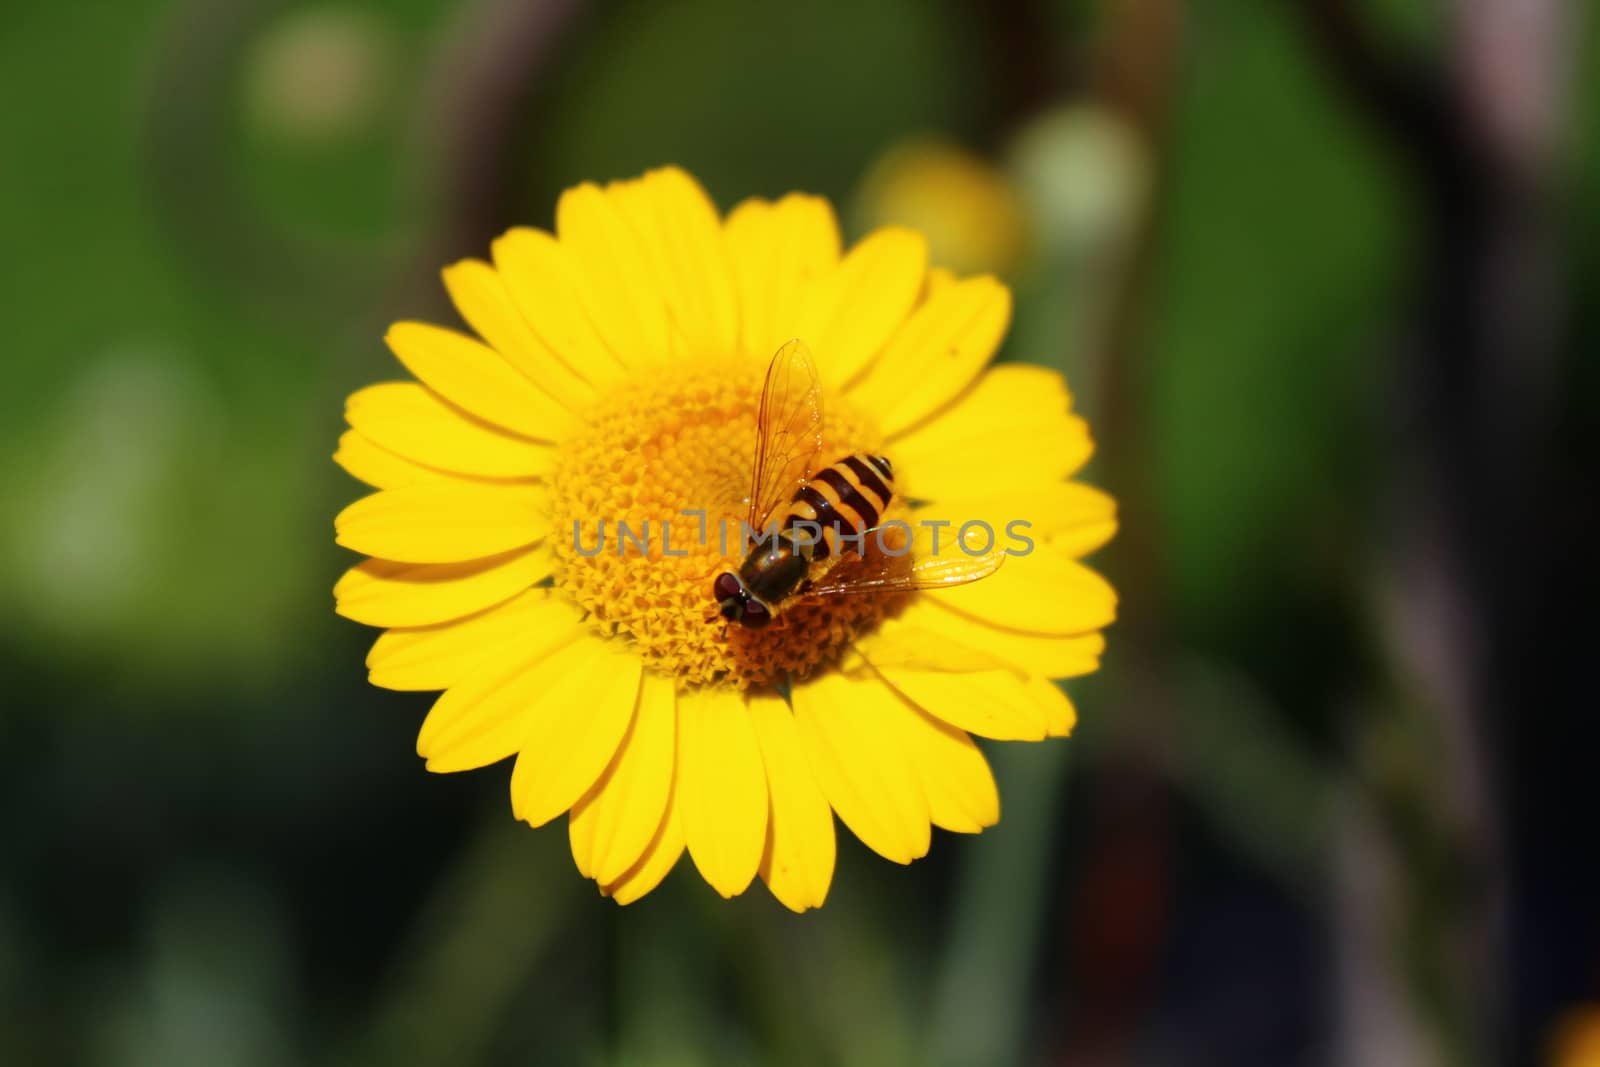 The picture shows little hoverfly on a yellow flower